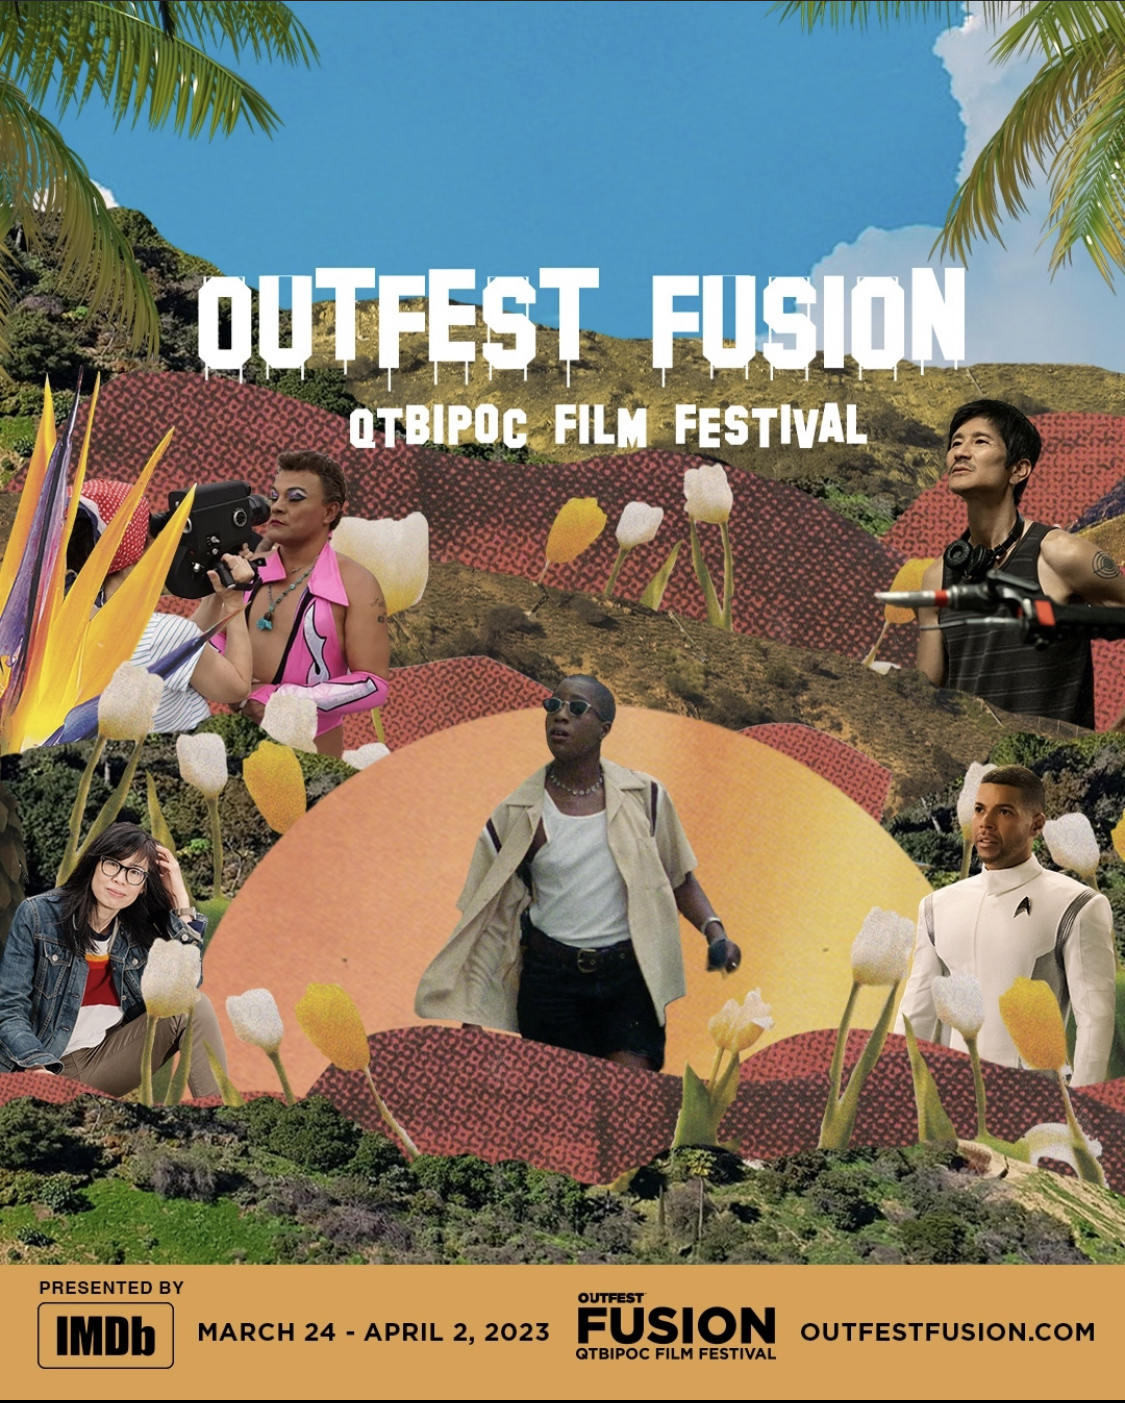 Outfest Fusion QTBIPOC Film Festival this weekend! The LA Beat